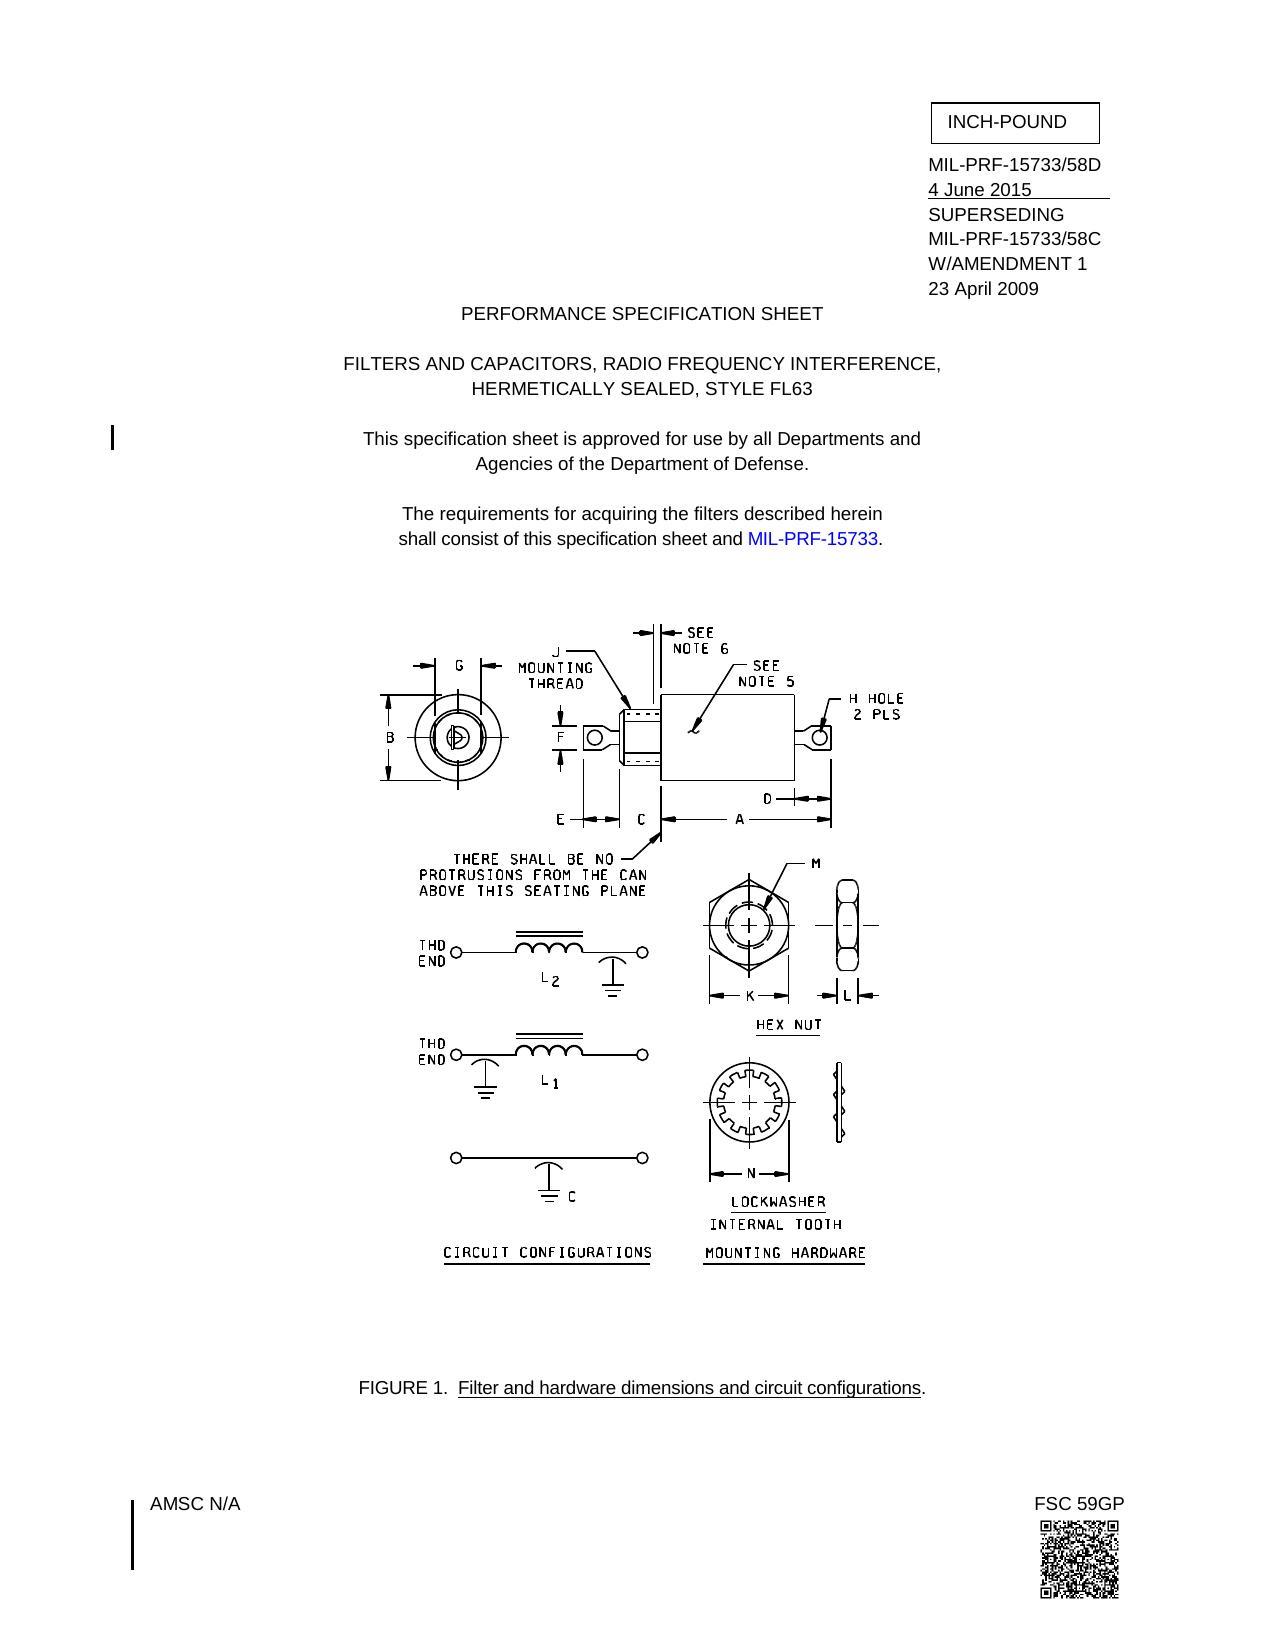 filters-and-capacitors-radio-frequency-interference-hermetically-sealed-style-fl63.pdf